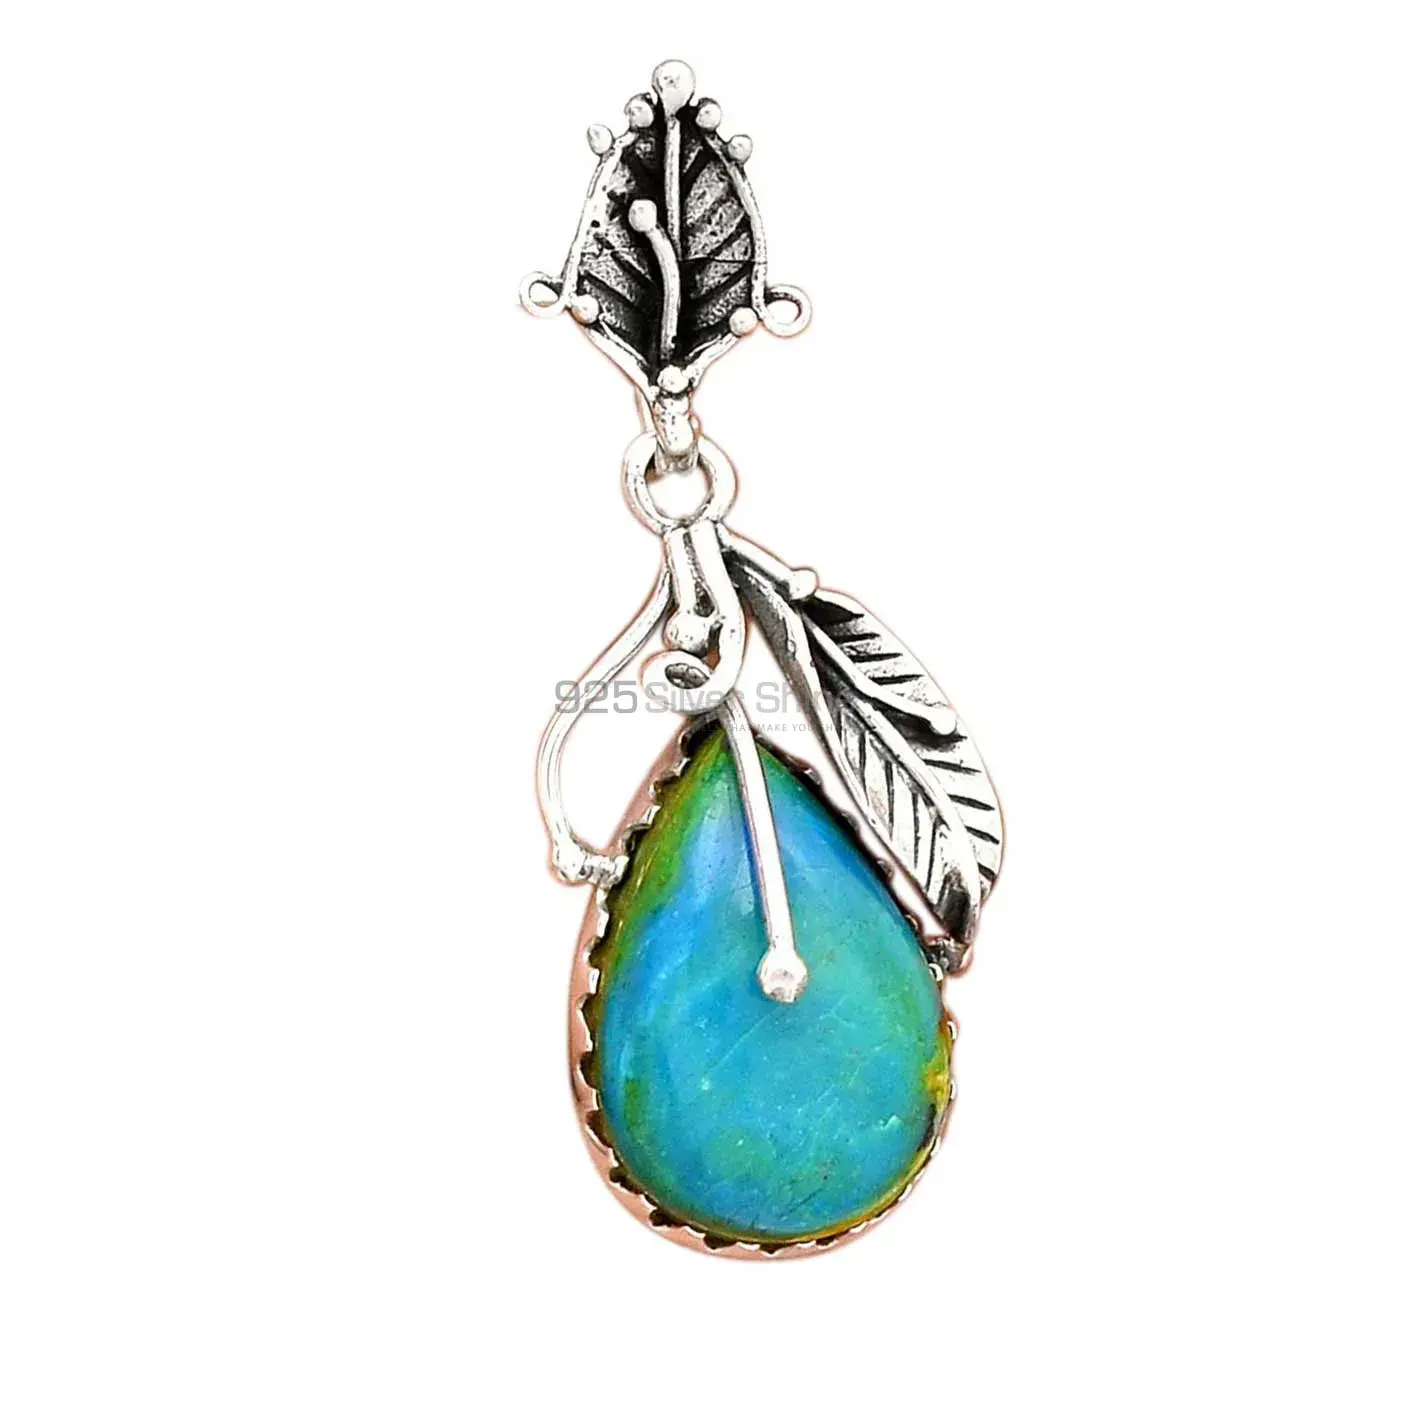 High Quality American Turquoise Gemstone Handmade Pendants In Solid Sterling Silver Jewelry 925SP082-4_4